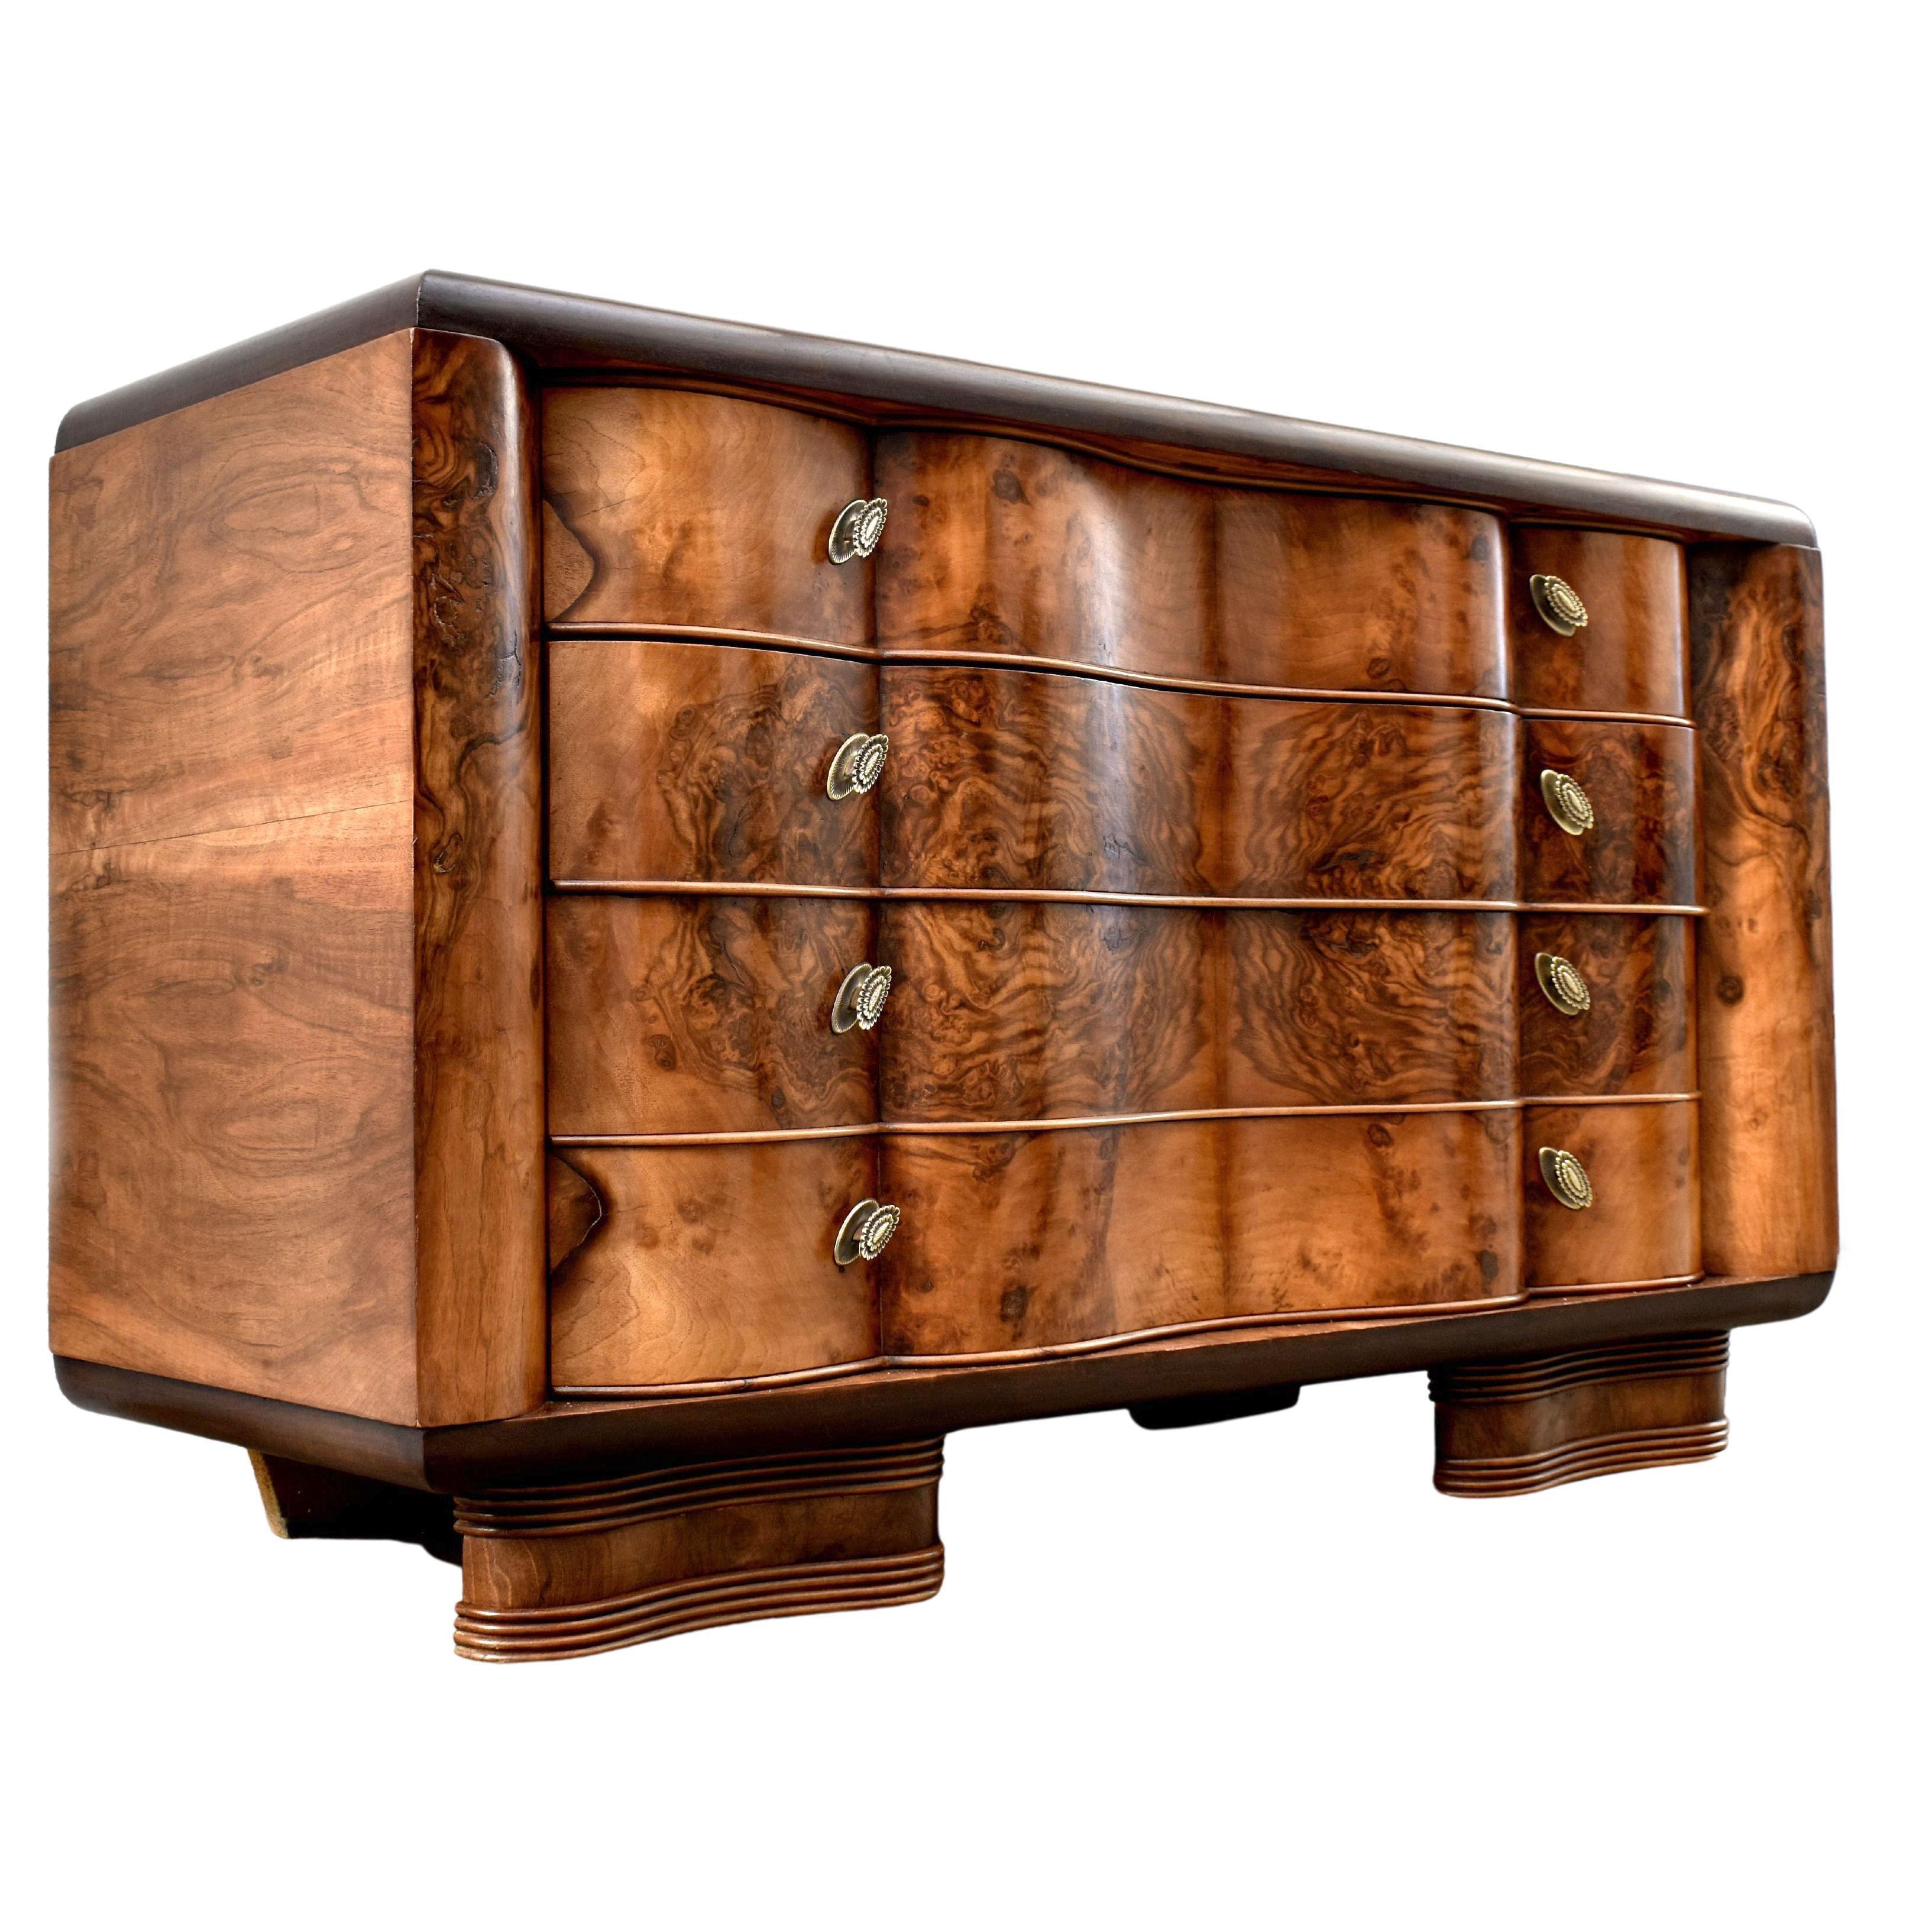 For your consideration is this superbly stylish Art Deco Italian walnut chest of four drawers dating to the 1930's. It has stunning walnut veneers and great original Art Deco handles in silvered metal. On first viewing these drawers are an